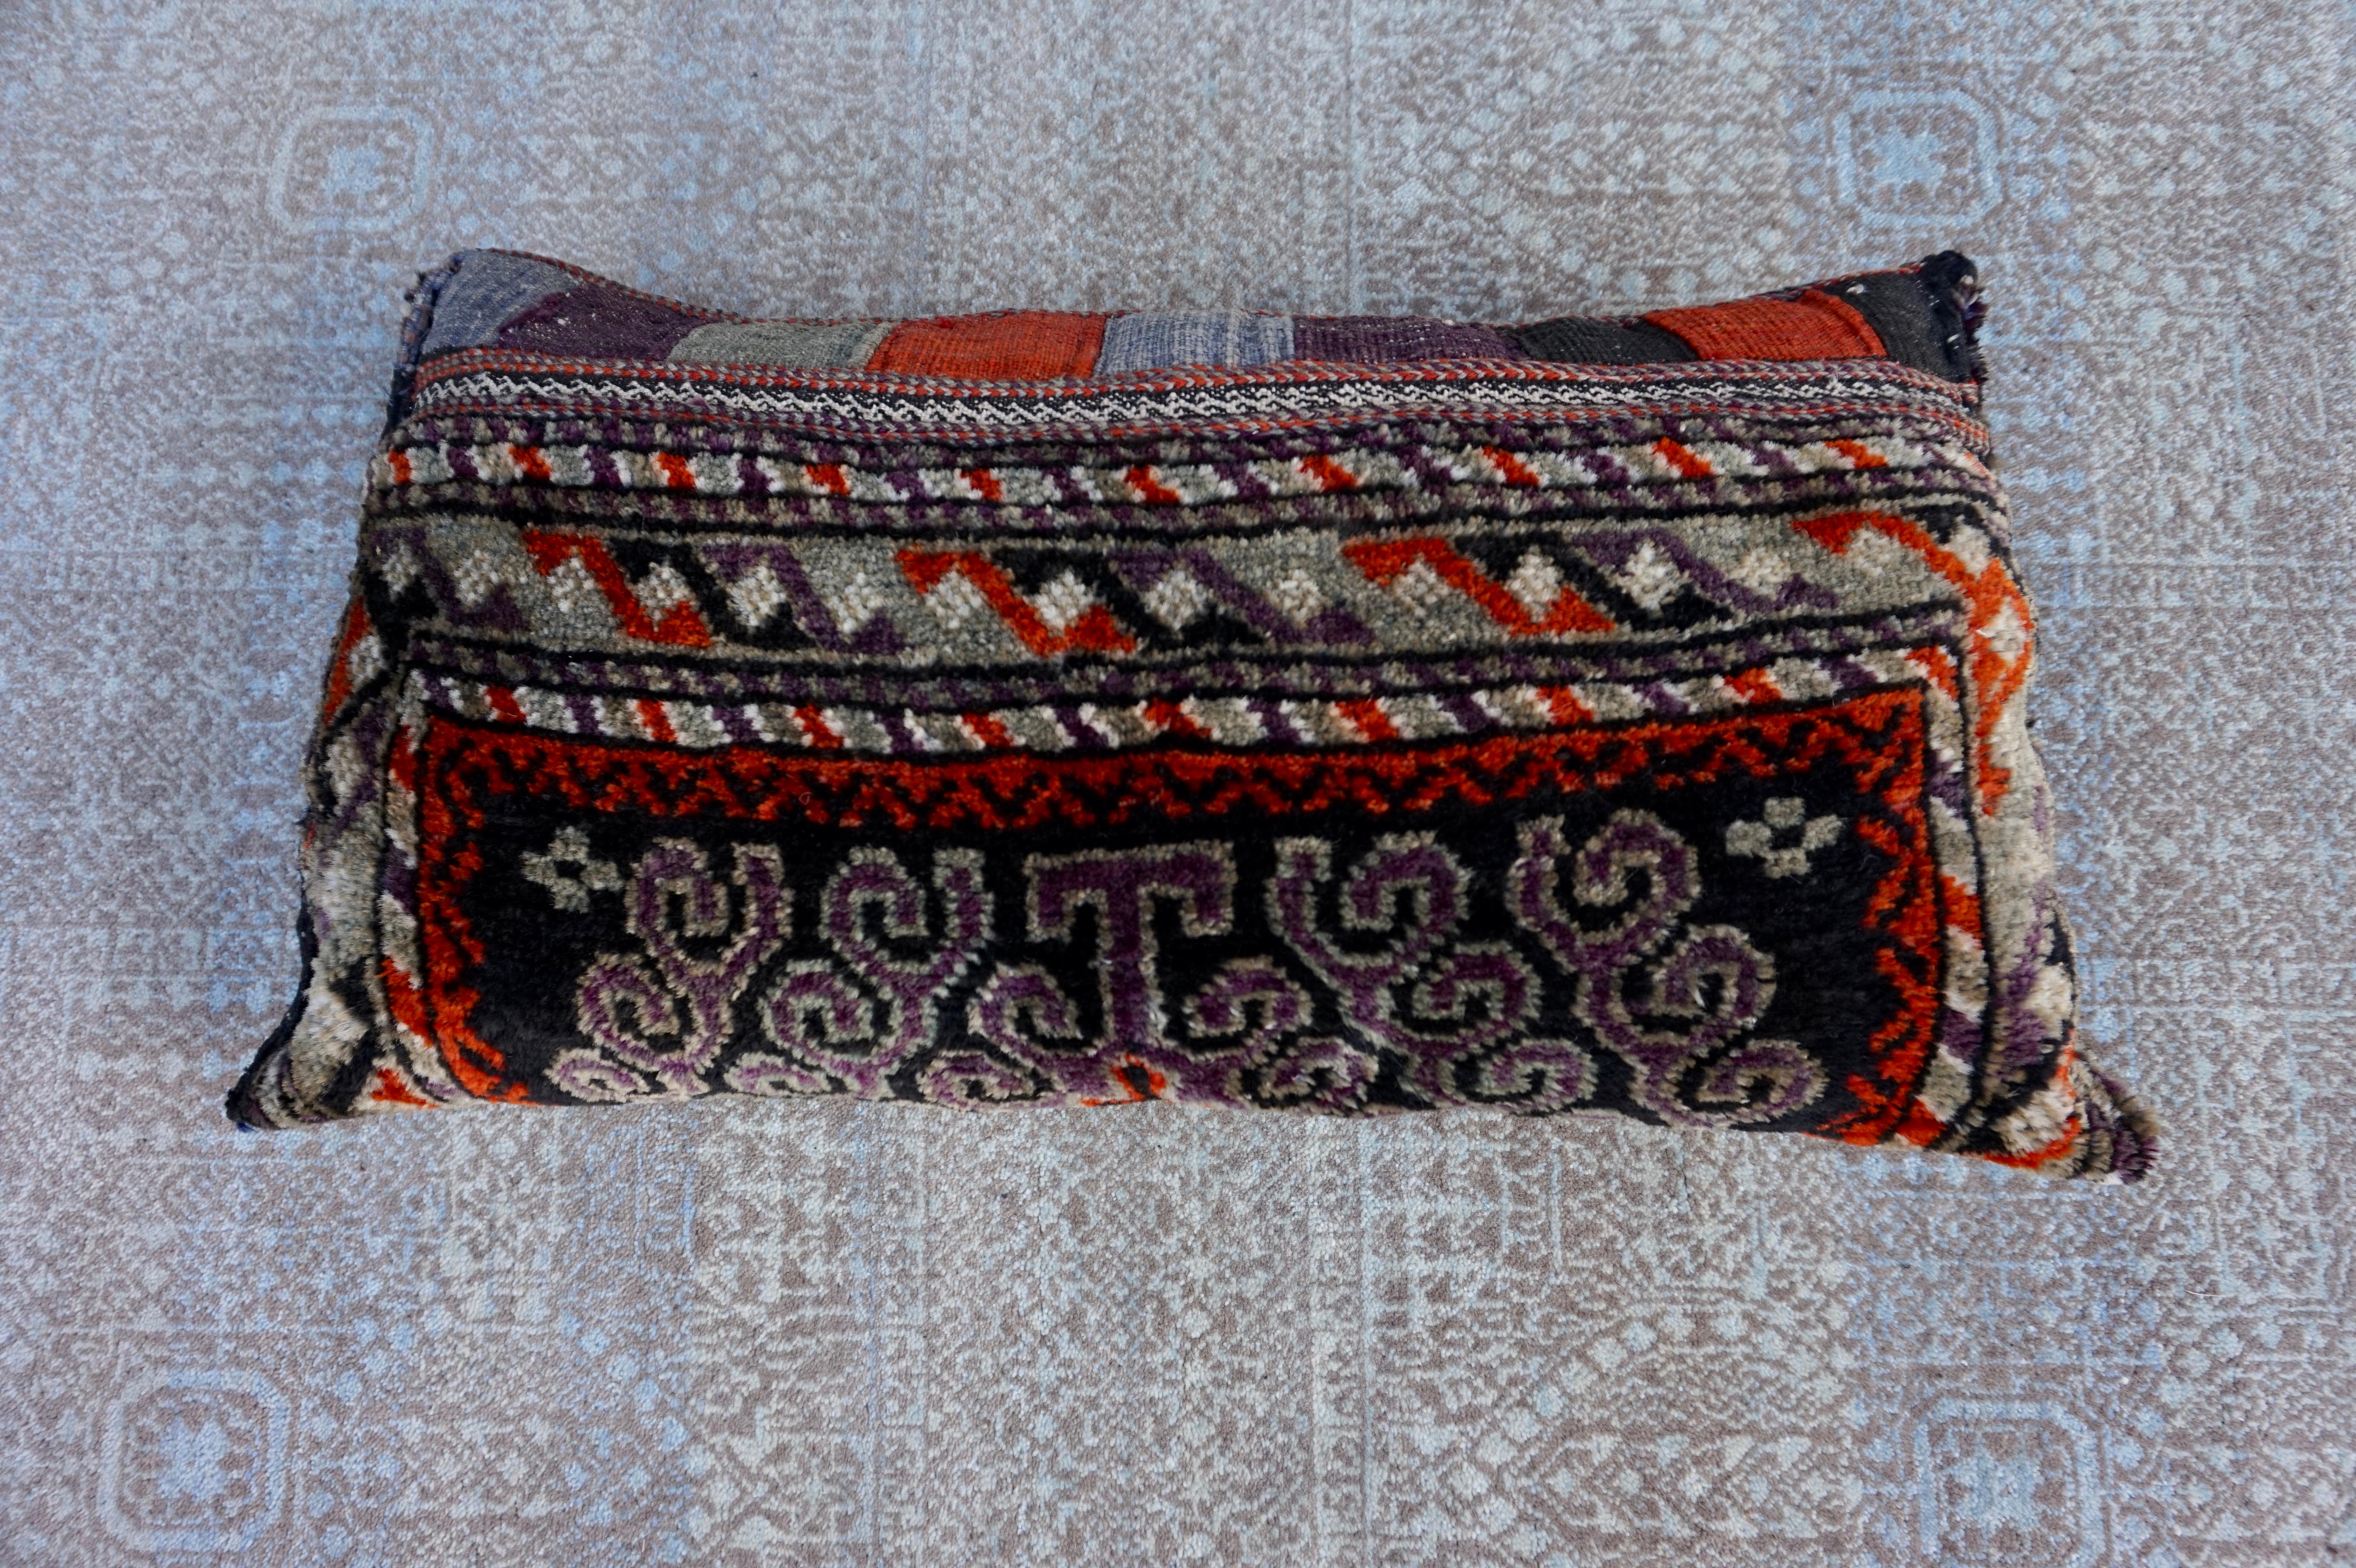 Rustic Hand-Knotted Wool Cushion Pillow with Geometric Tribal Patterns In Good Condition For Sale In Vancouver, British Columbia